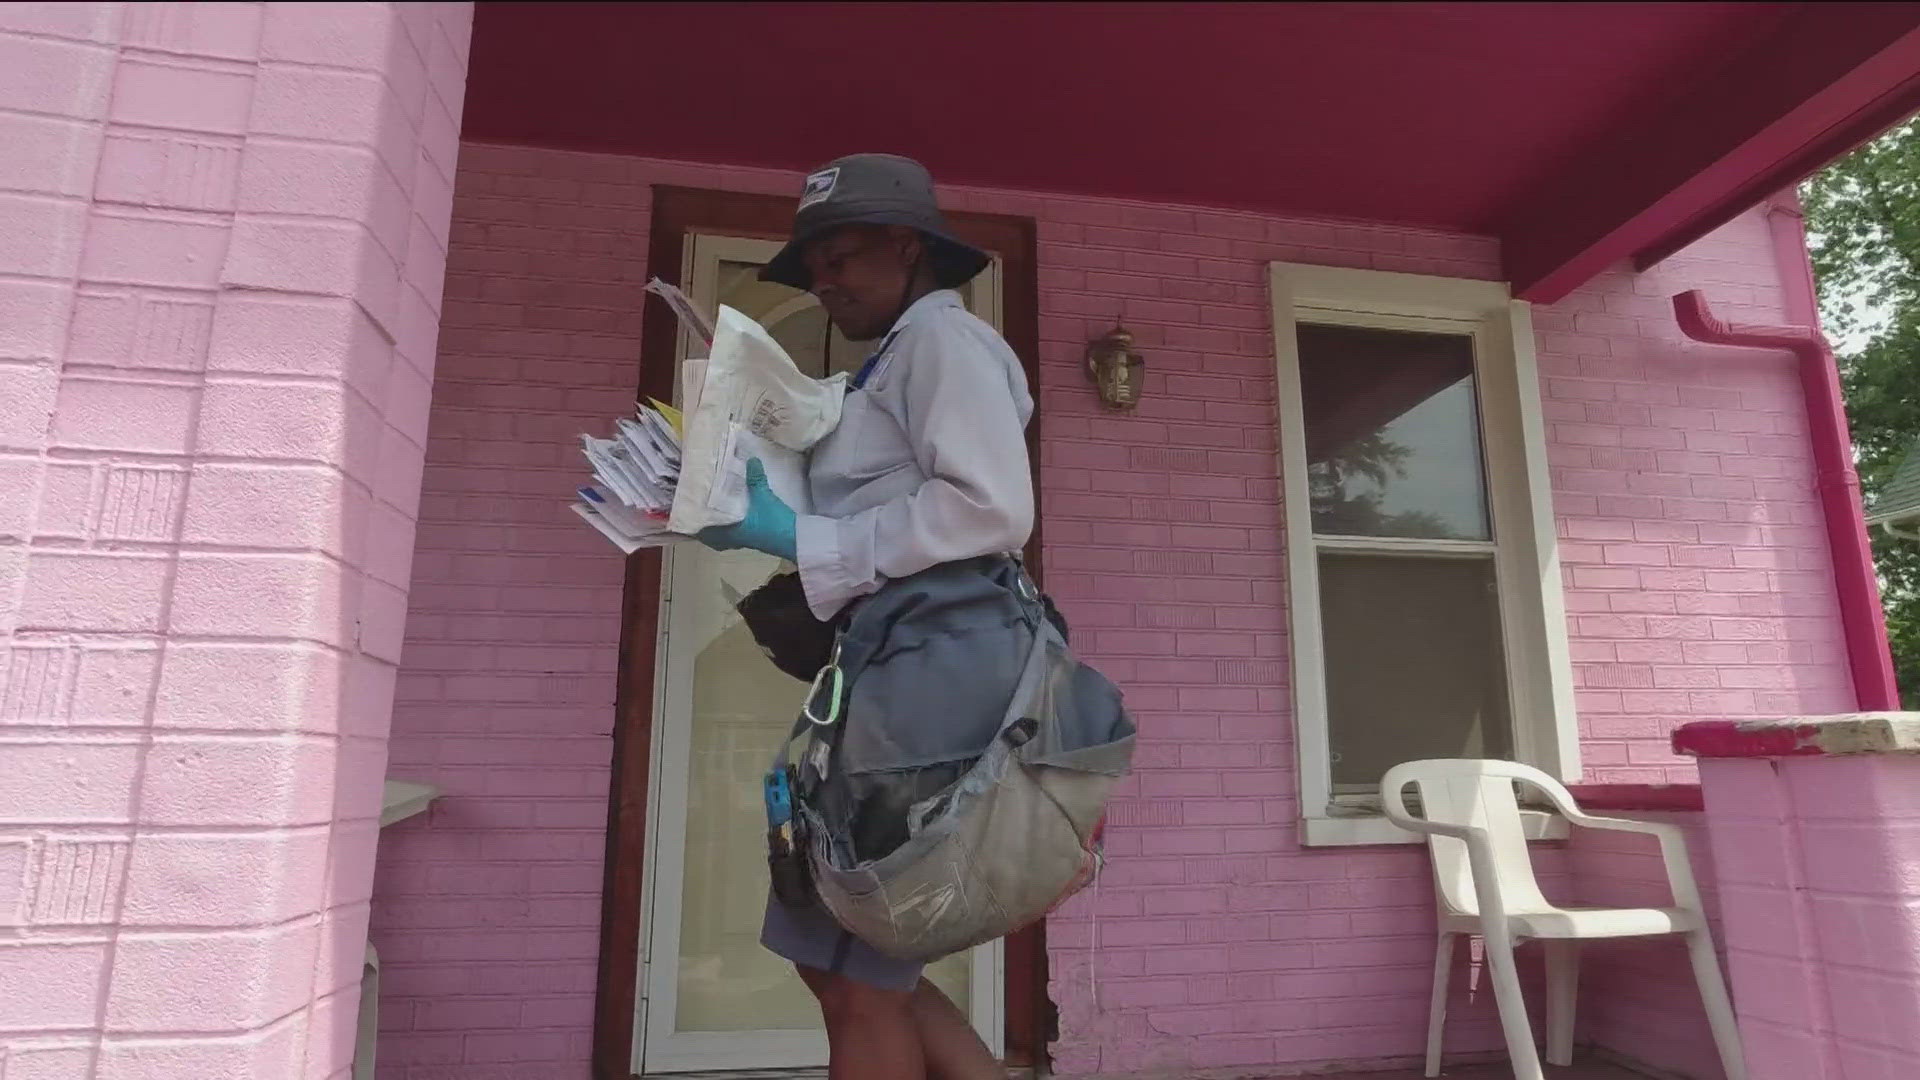 53-year-old Rachelle Roy says she takes a few extra steps to try and keep herself cool while delivering mail in the hot weather.